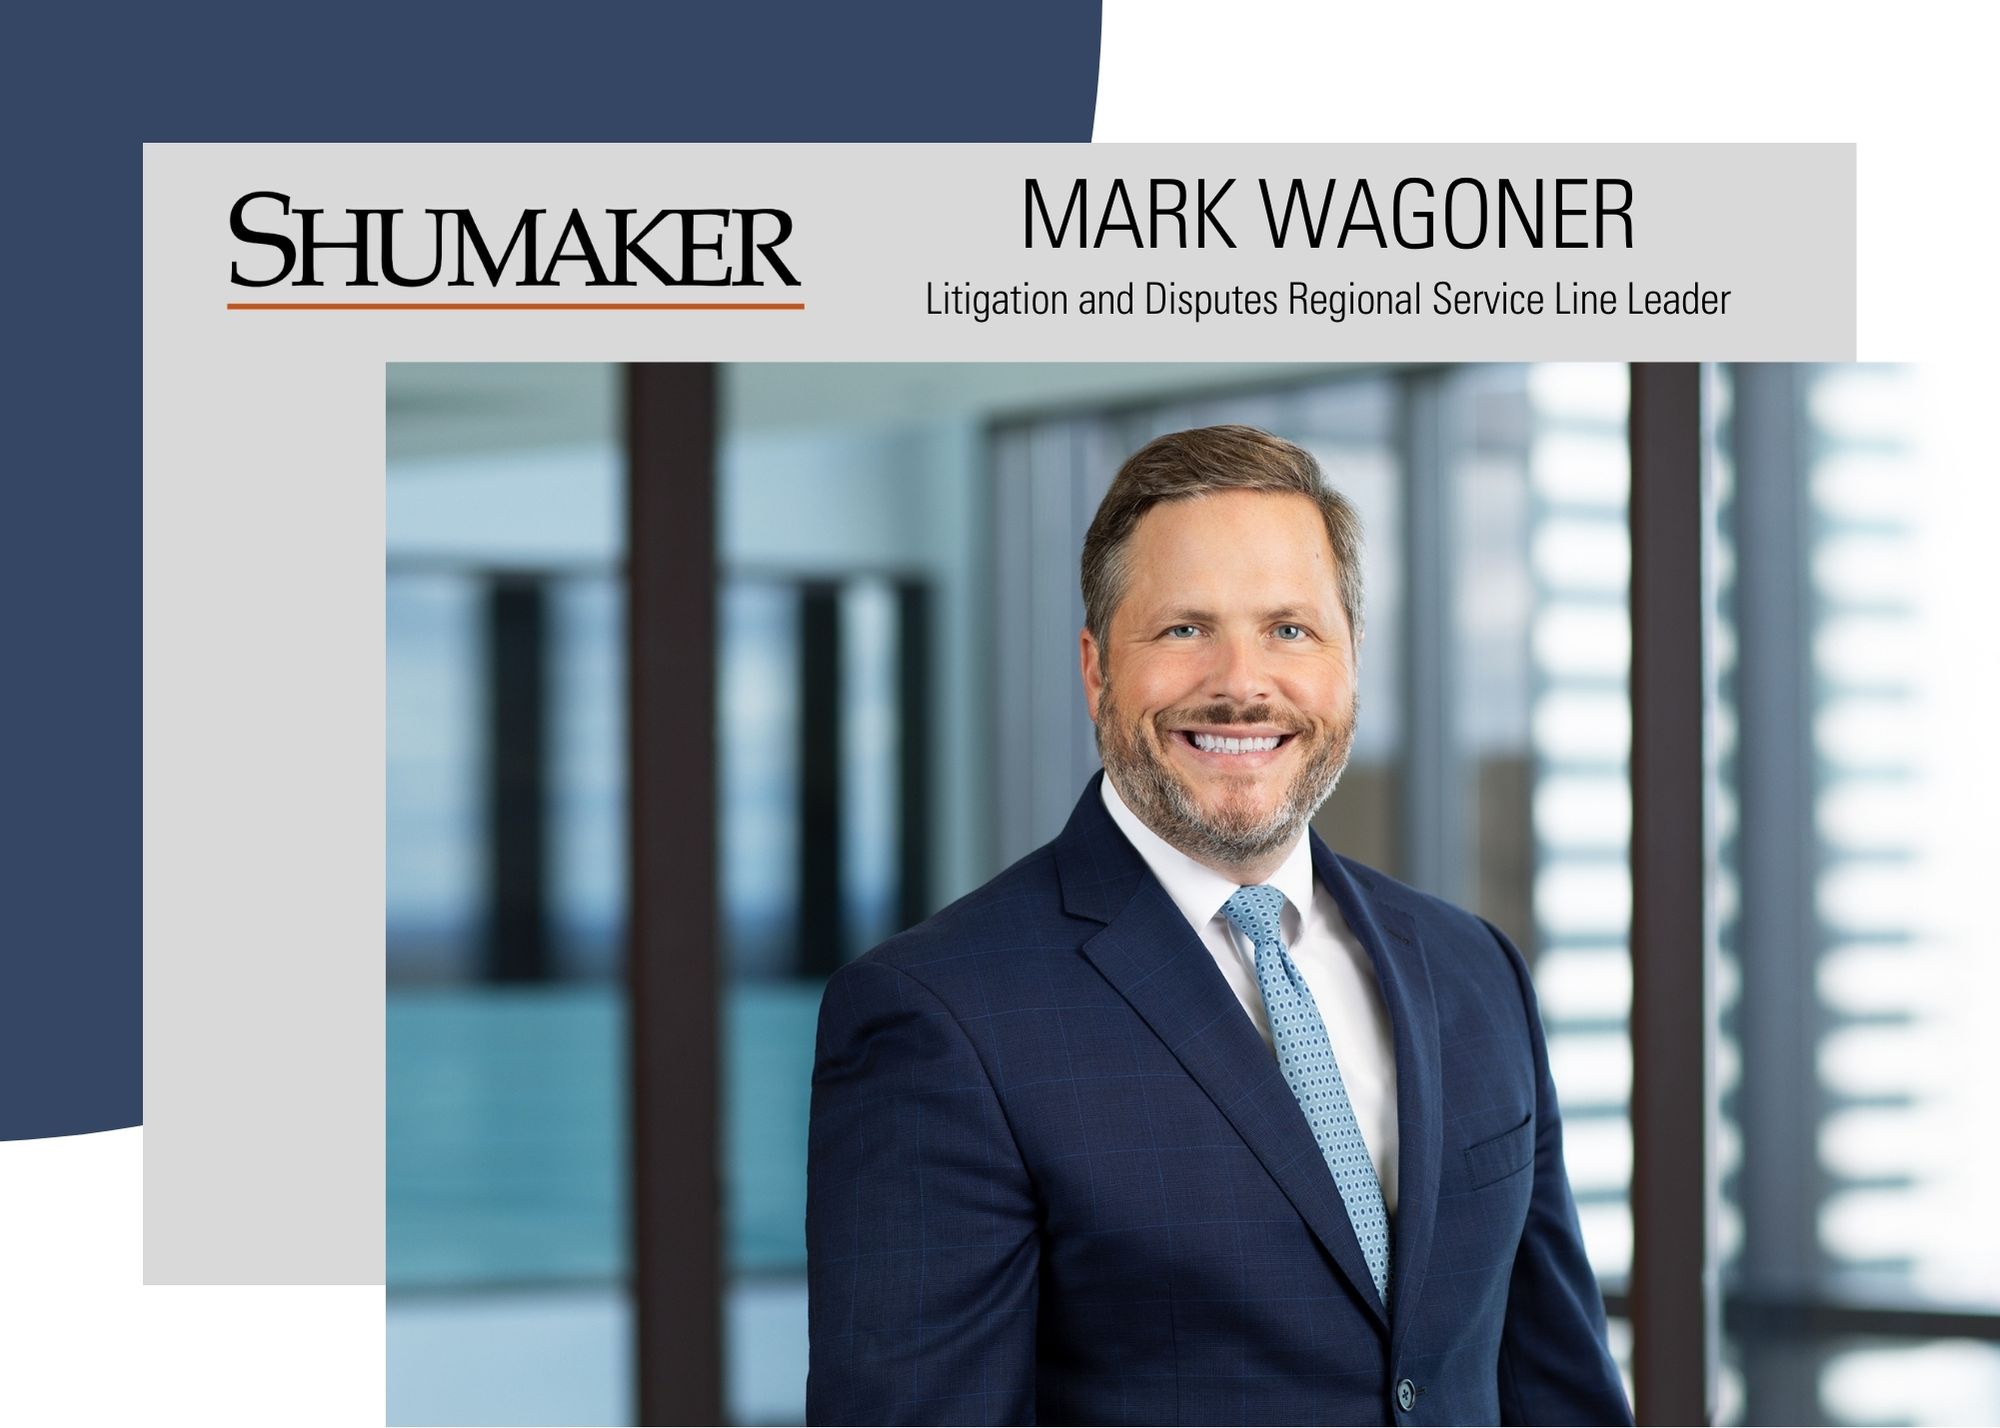 Shumaker’s Mark Wagoner Appointed to Life Member Committee of the Judicial Conference of the U.S. Court of Appeals for the Sixth Circuit